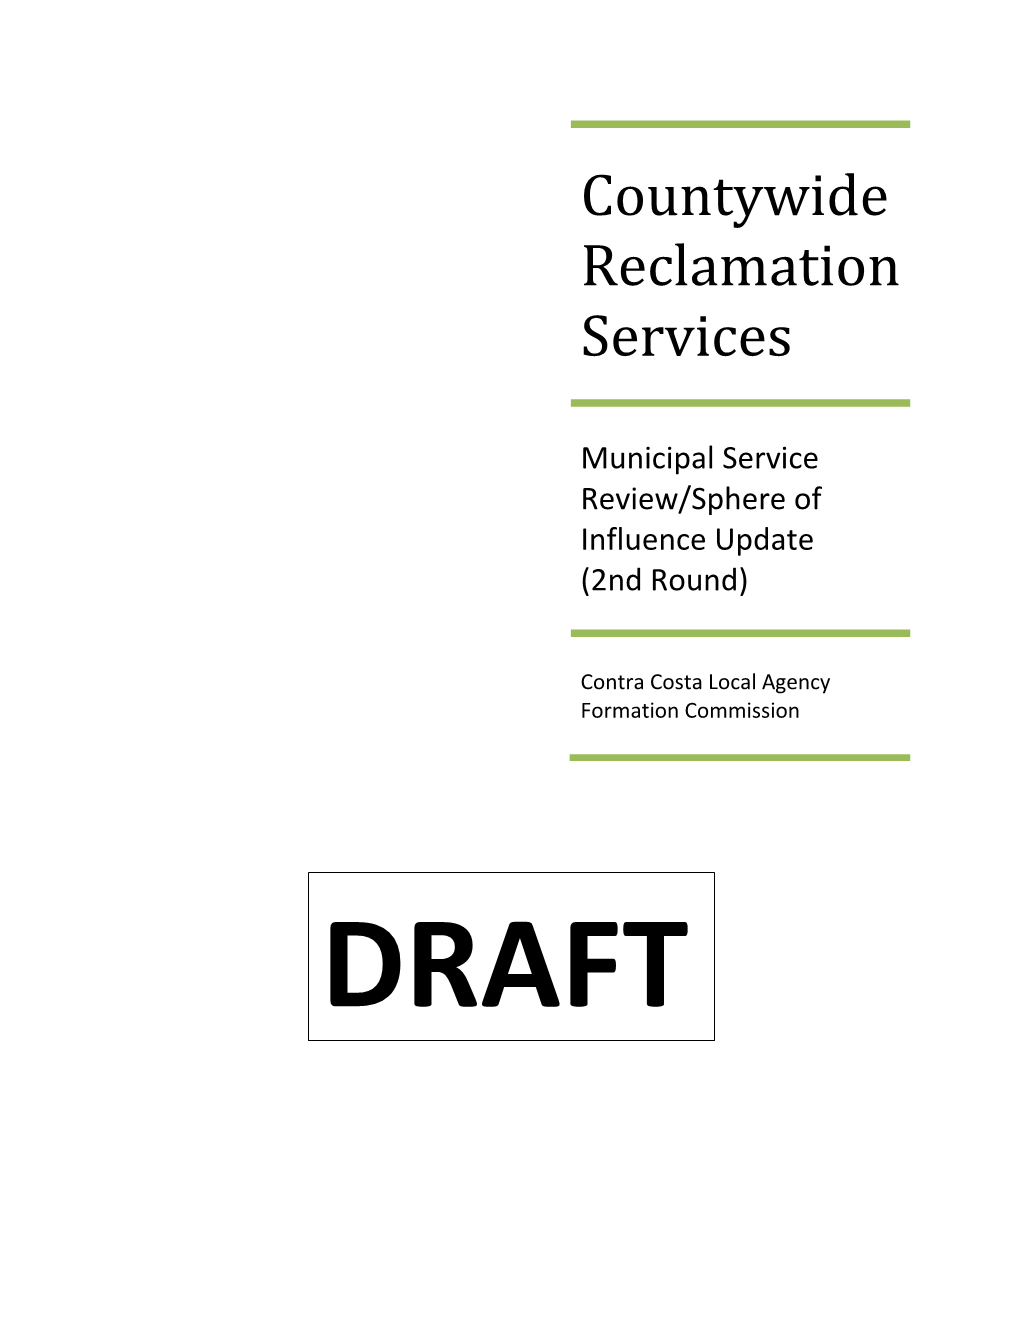 Countywide Reclamation Services